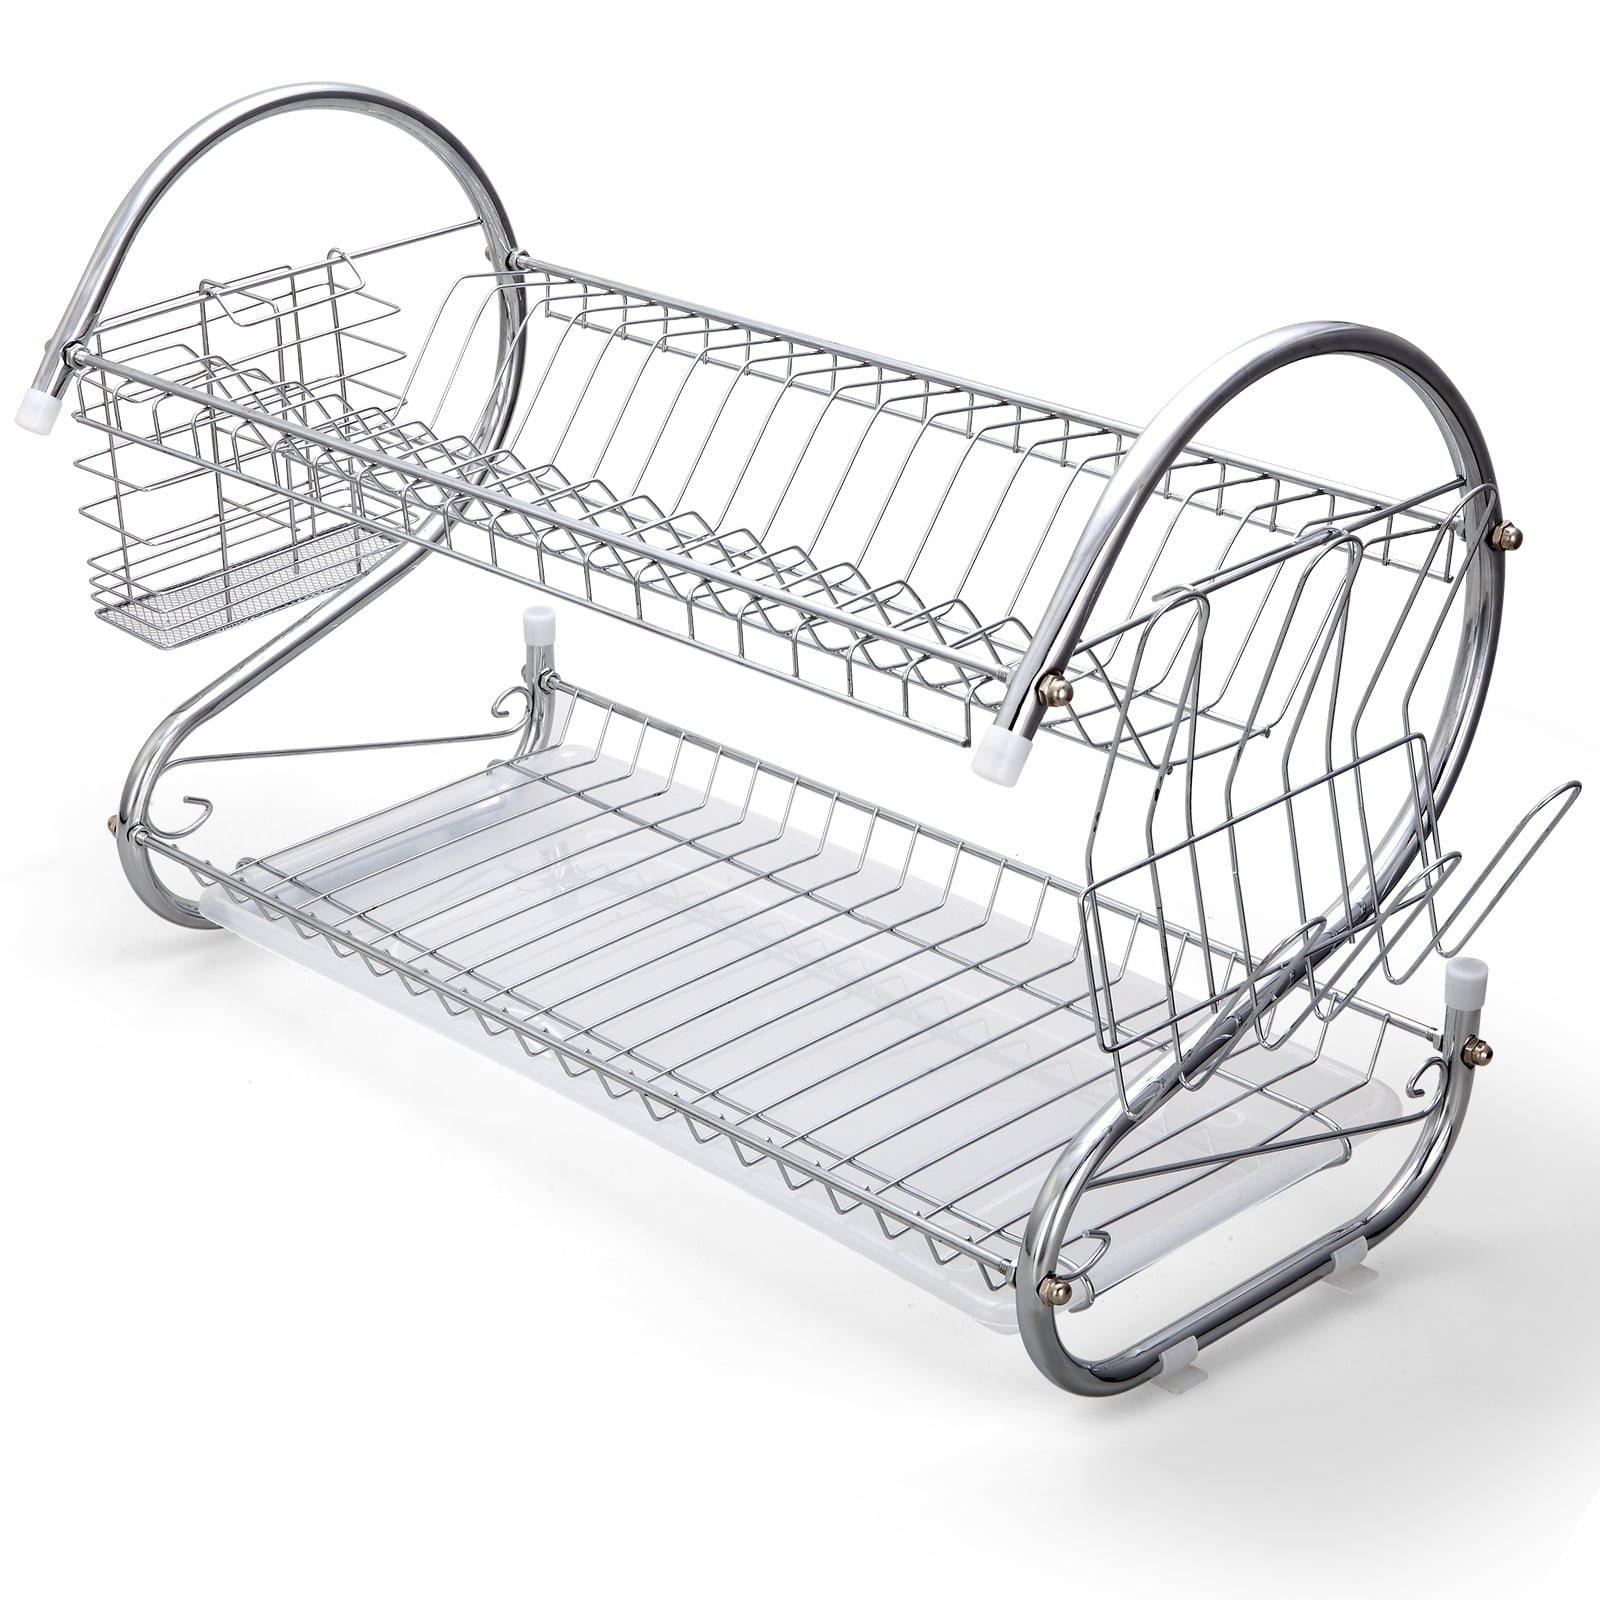 NIUXX Large Dishes Drying Rack Drainboard Set, 2 Tiers Stainless